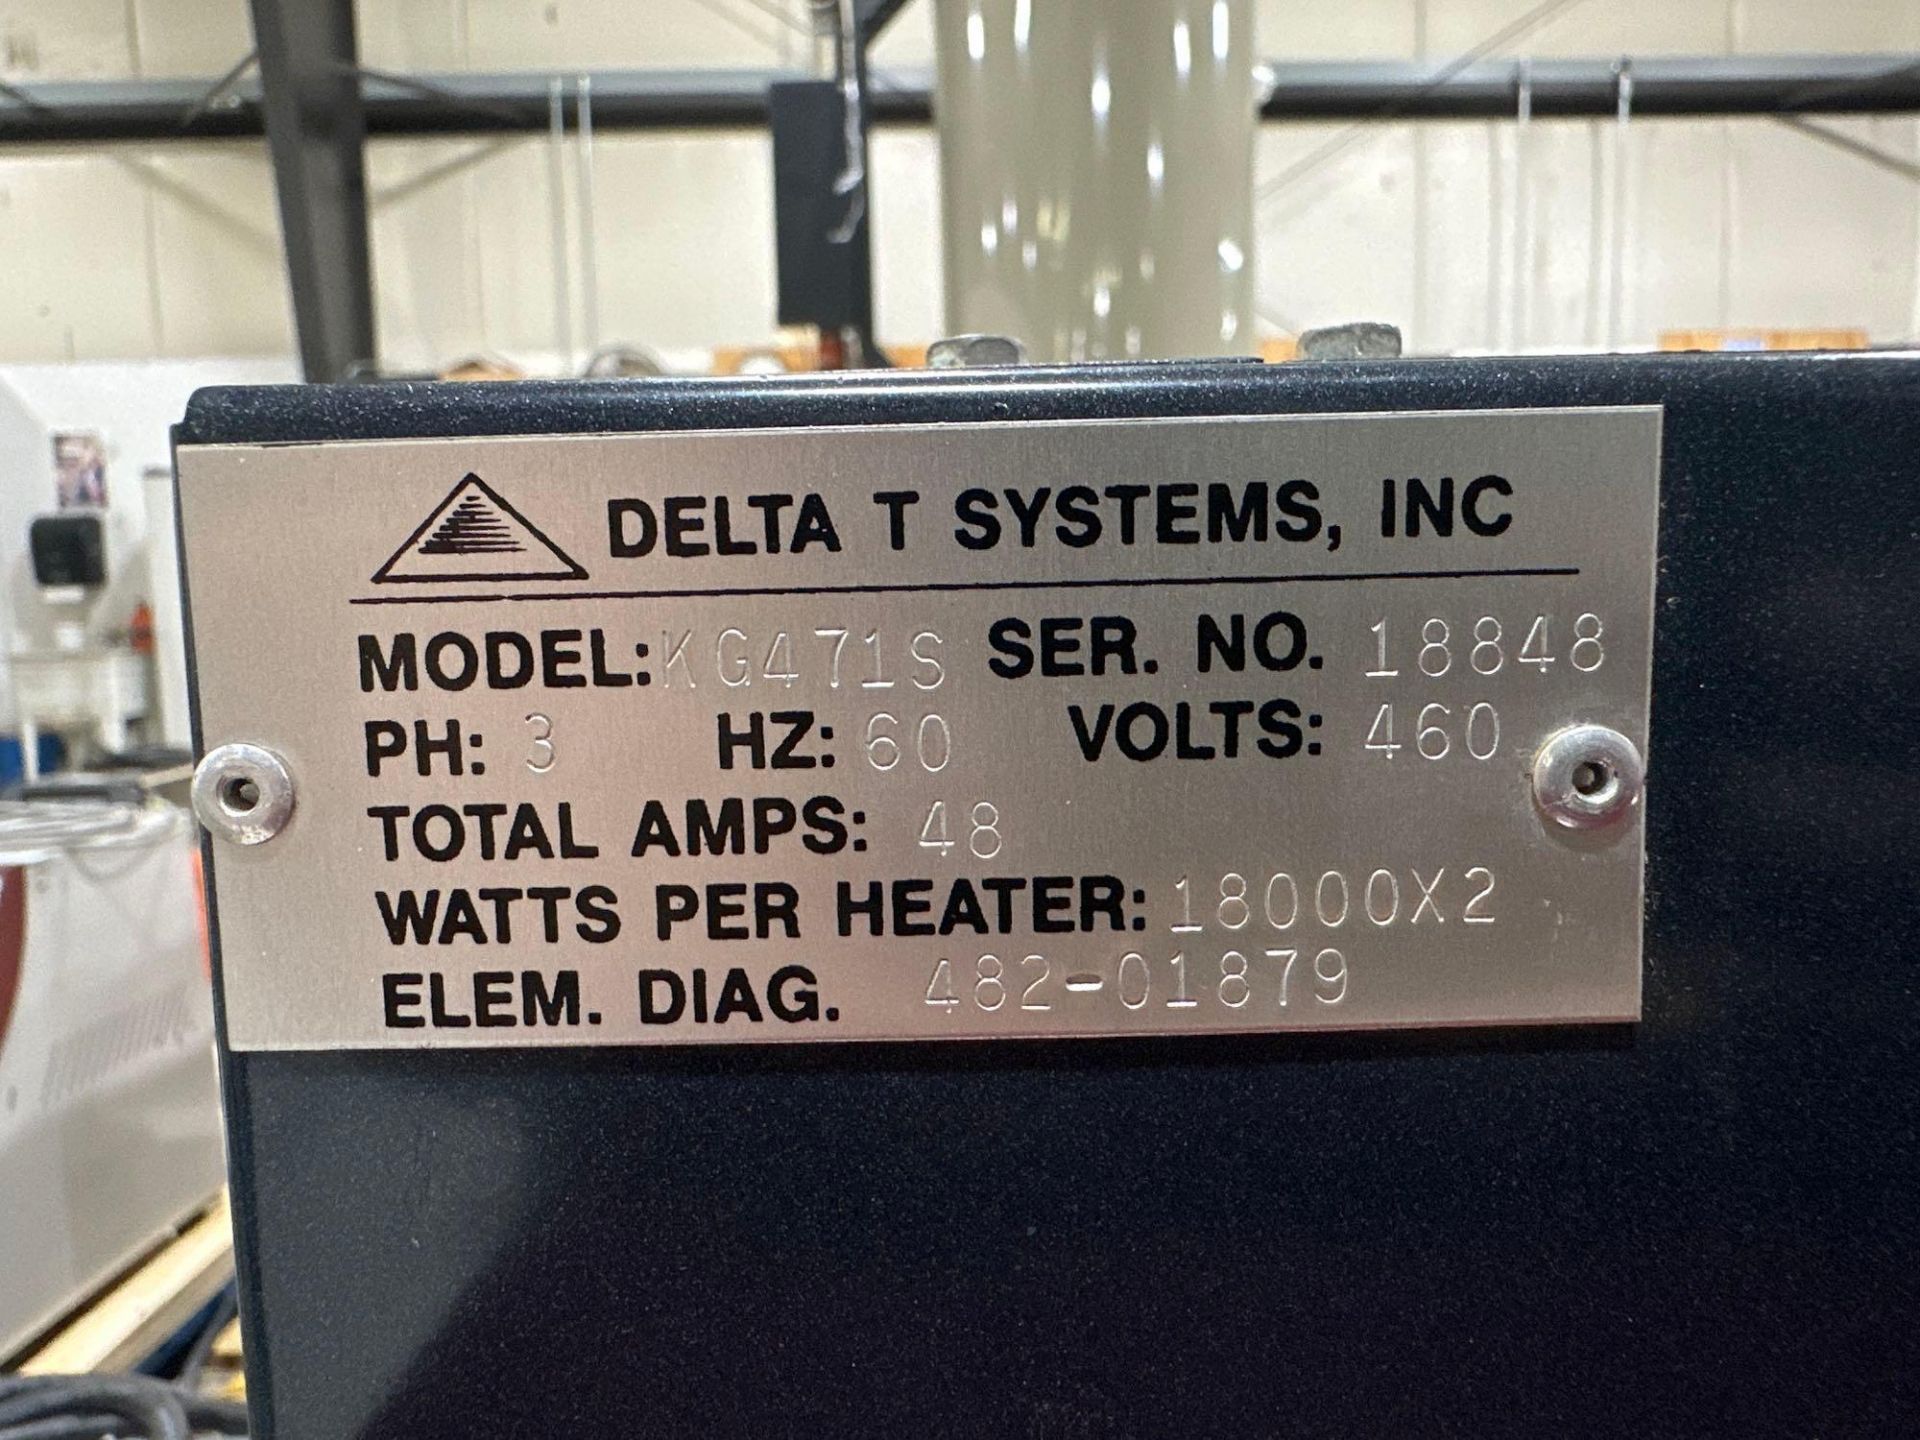 Delta T Systems KG471S Thermolator, 3hp, Dual Heater, 18kw, s/n 18848 - Image 7 of 14